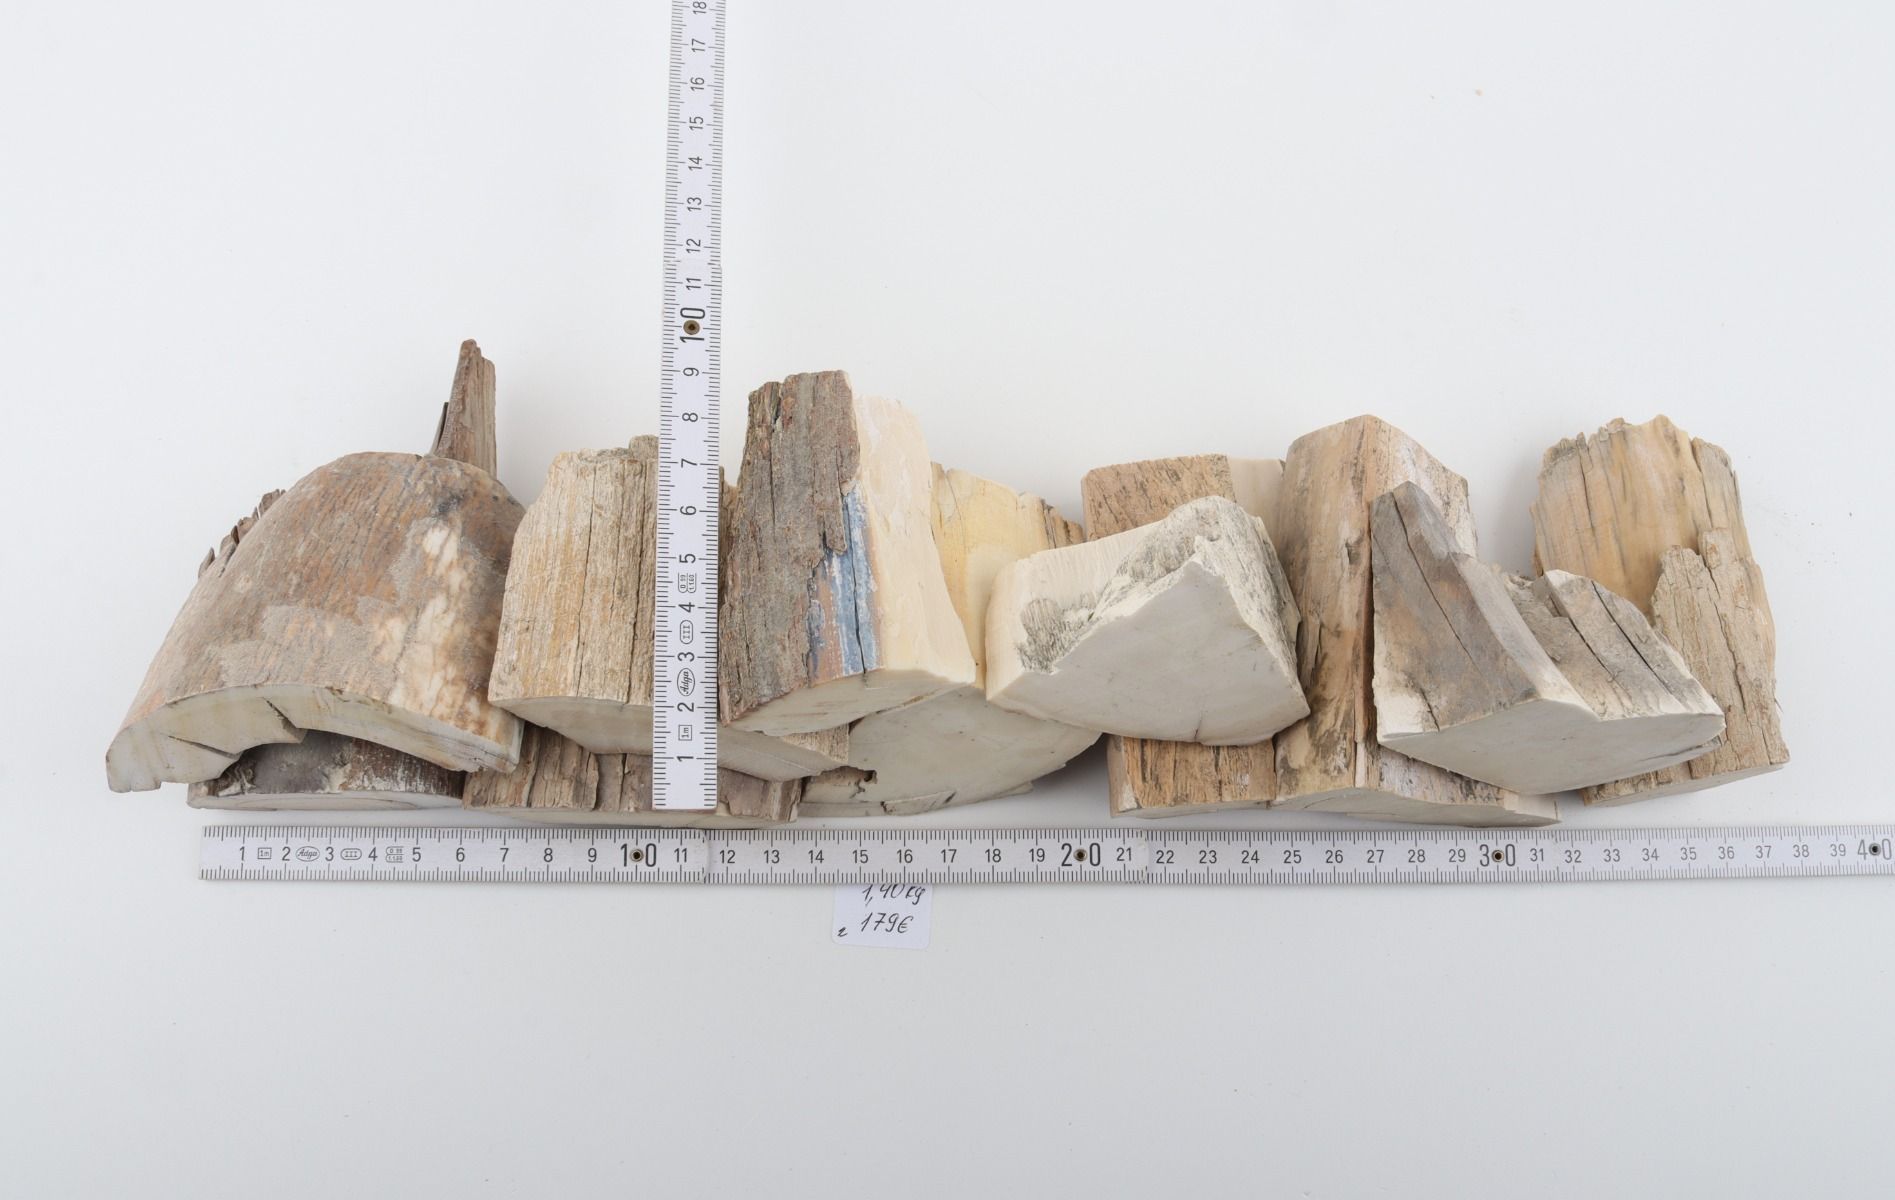 Untreated mammoth ivory pieces